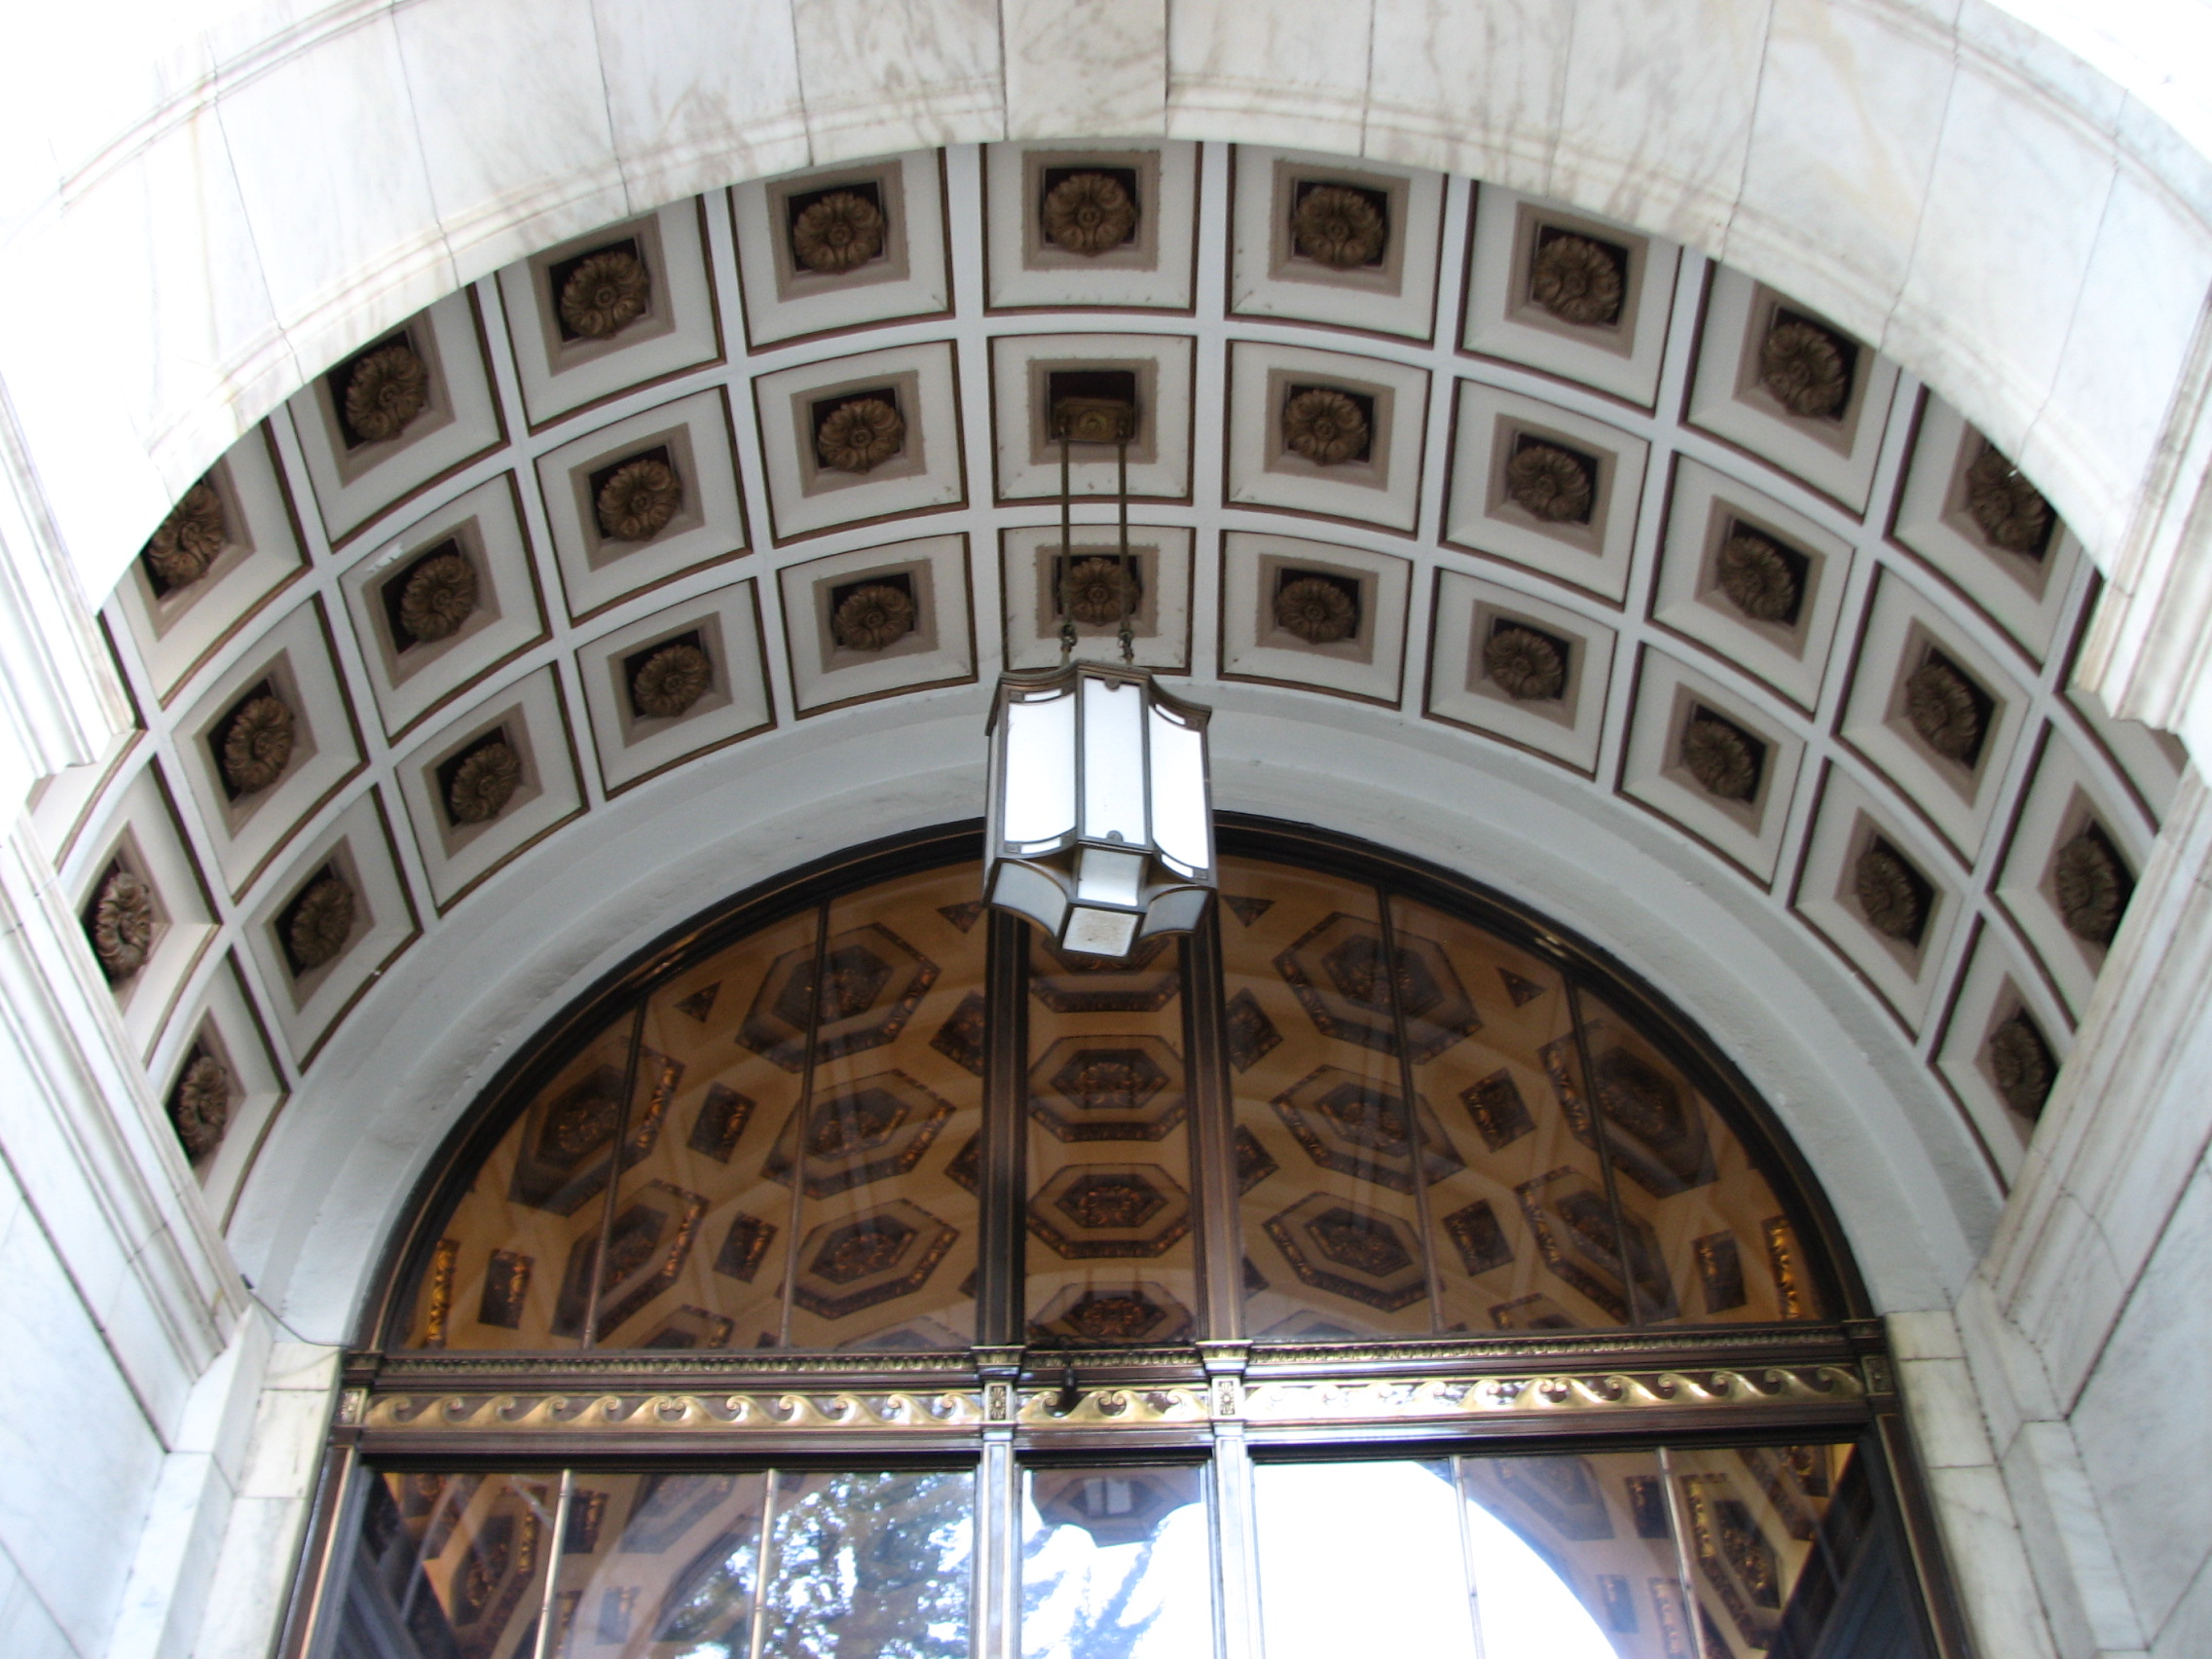 Coffered ceilings adorn the exterior arches and interior ceiling of the 6th Street entrance.